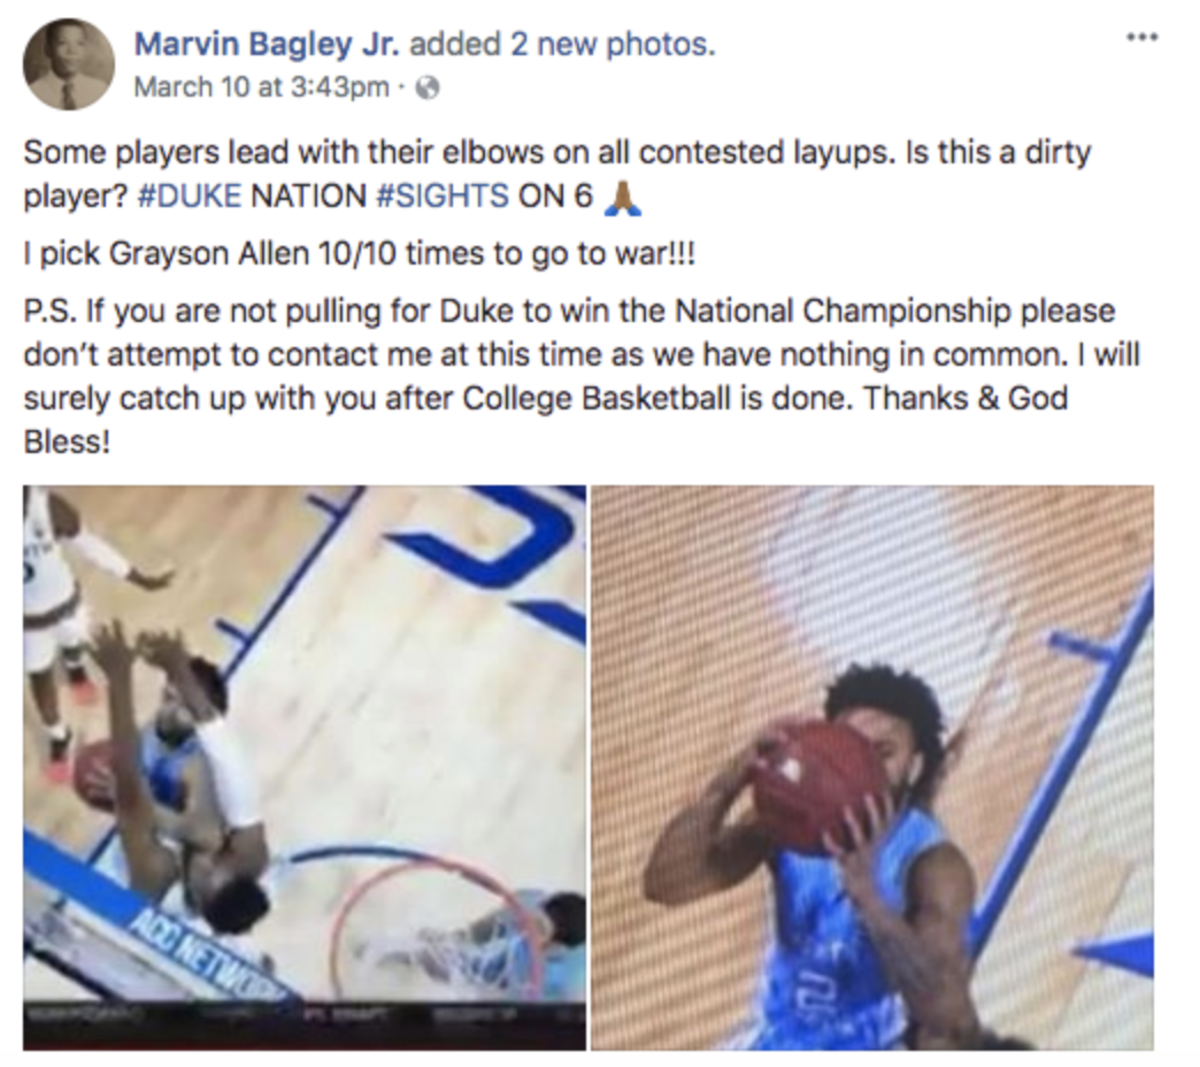 Marvin Bagley's father posts on Facebook.